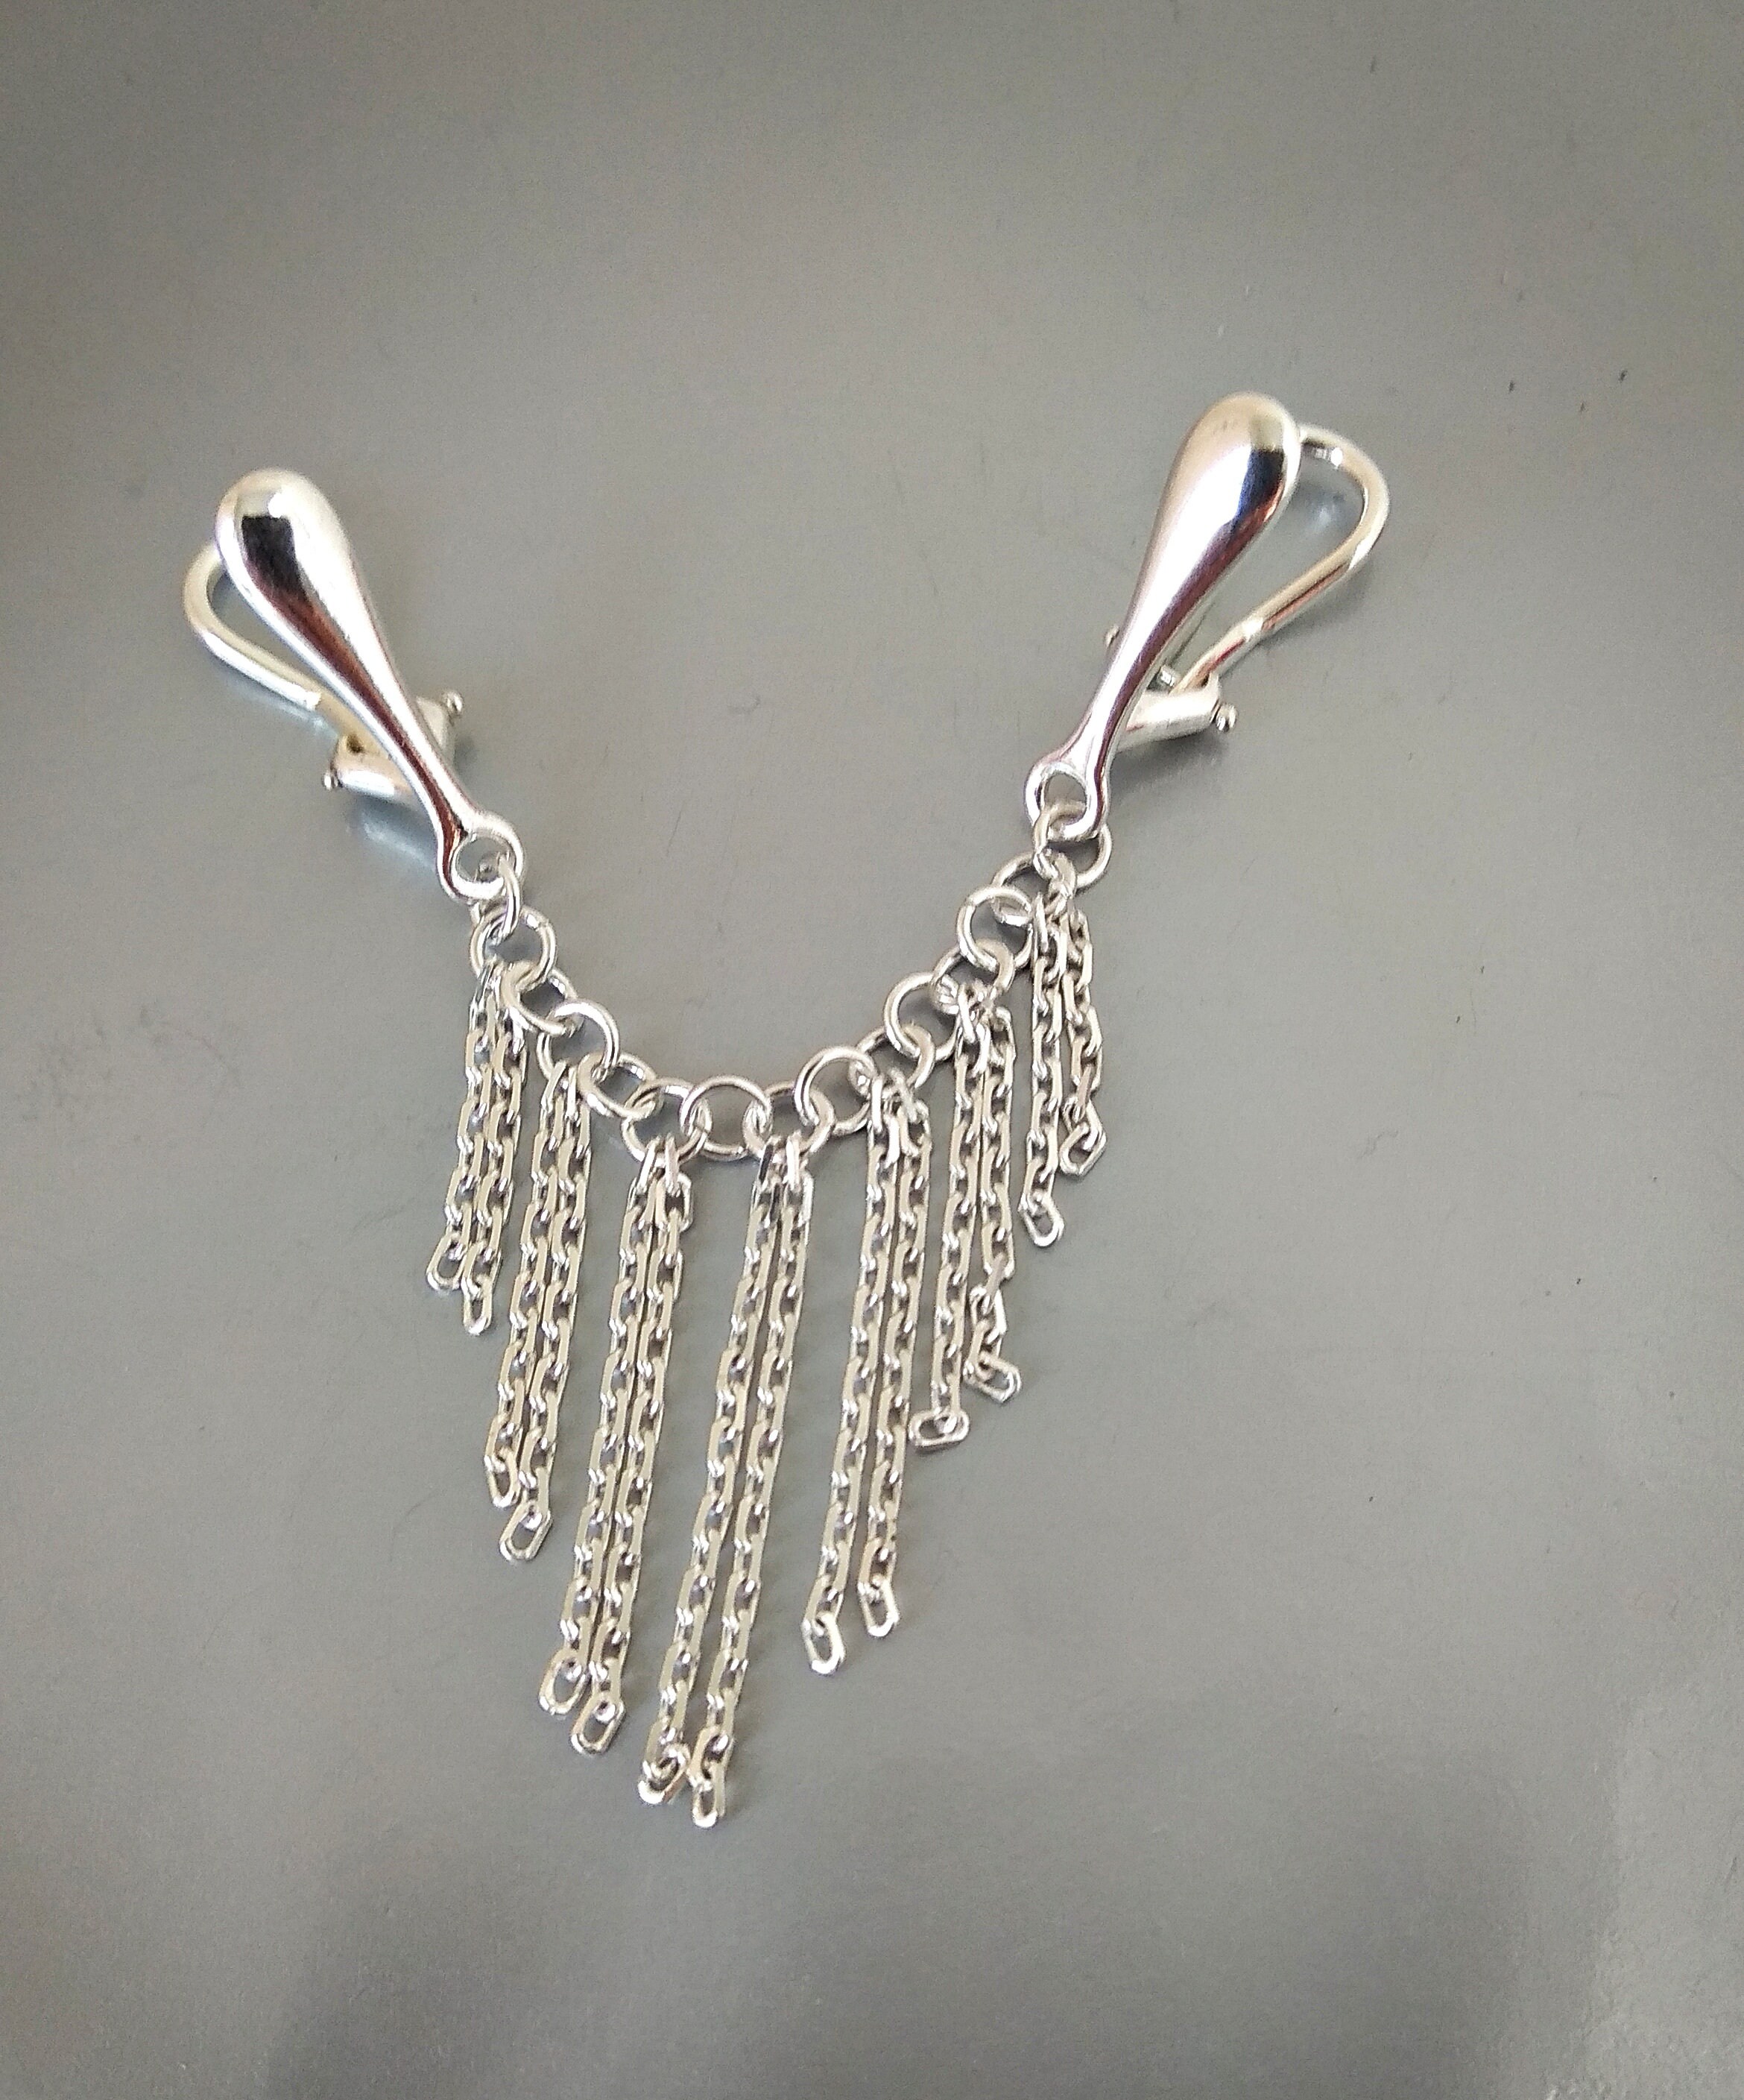 Erotic Vaginal Jewelryfake Body Piercing With Silver Chains Etsy